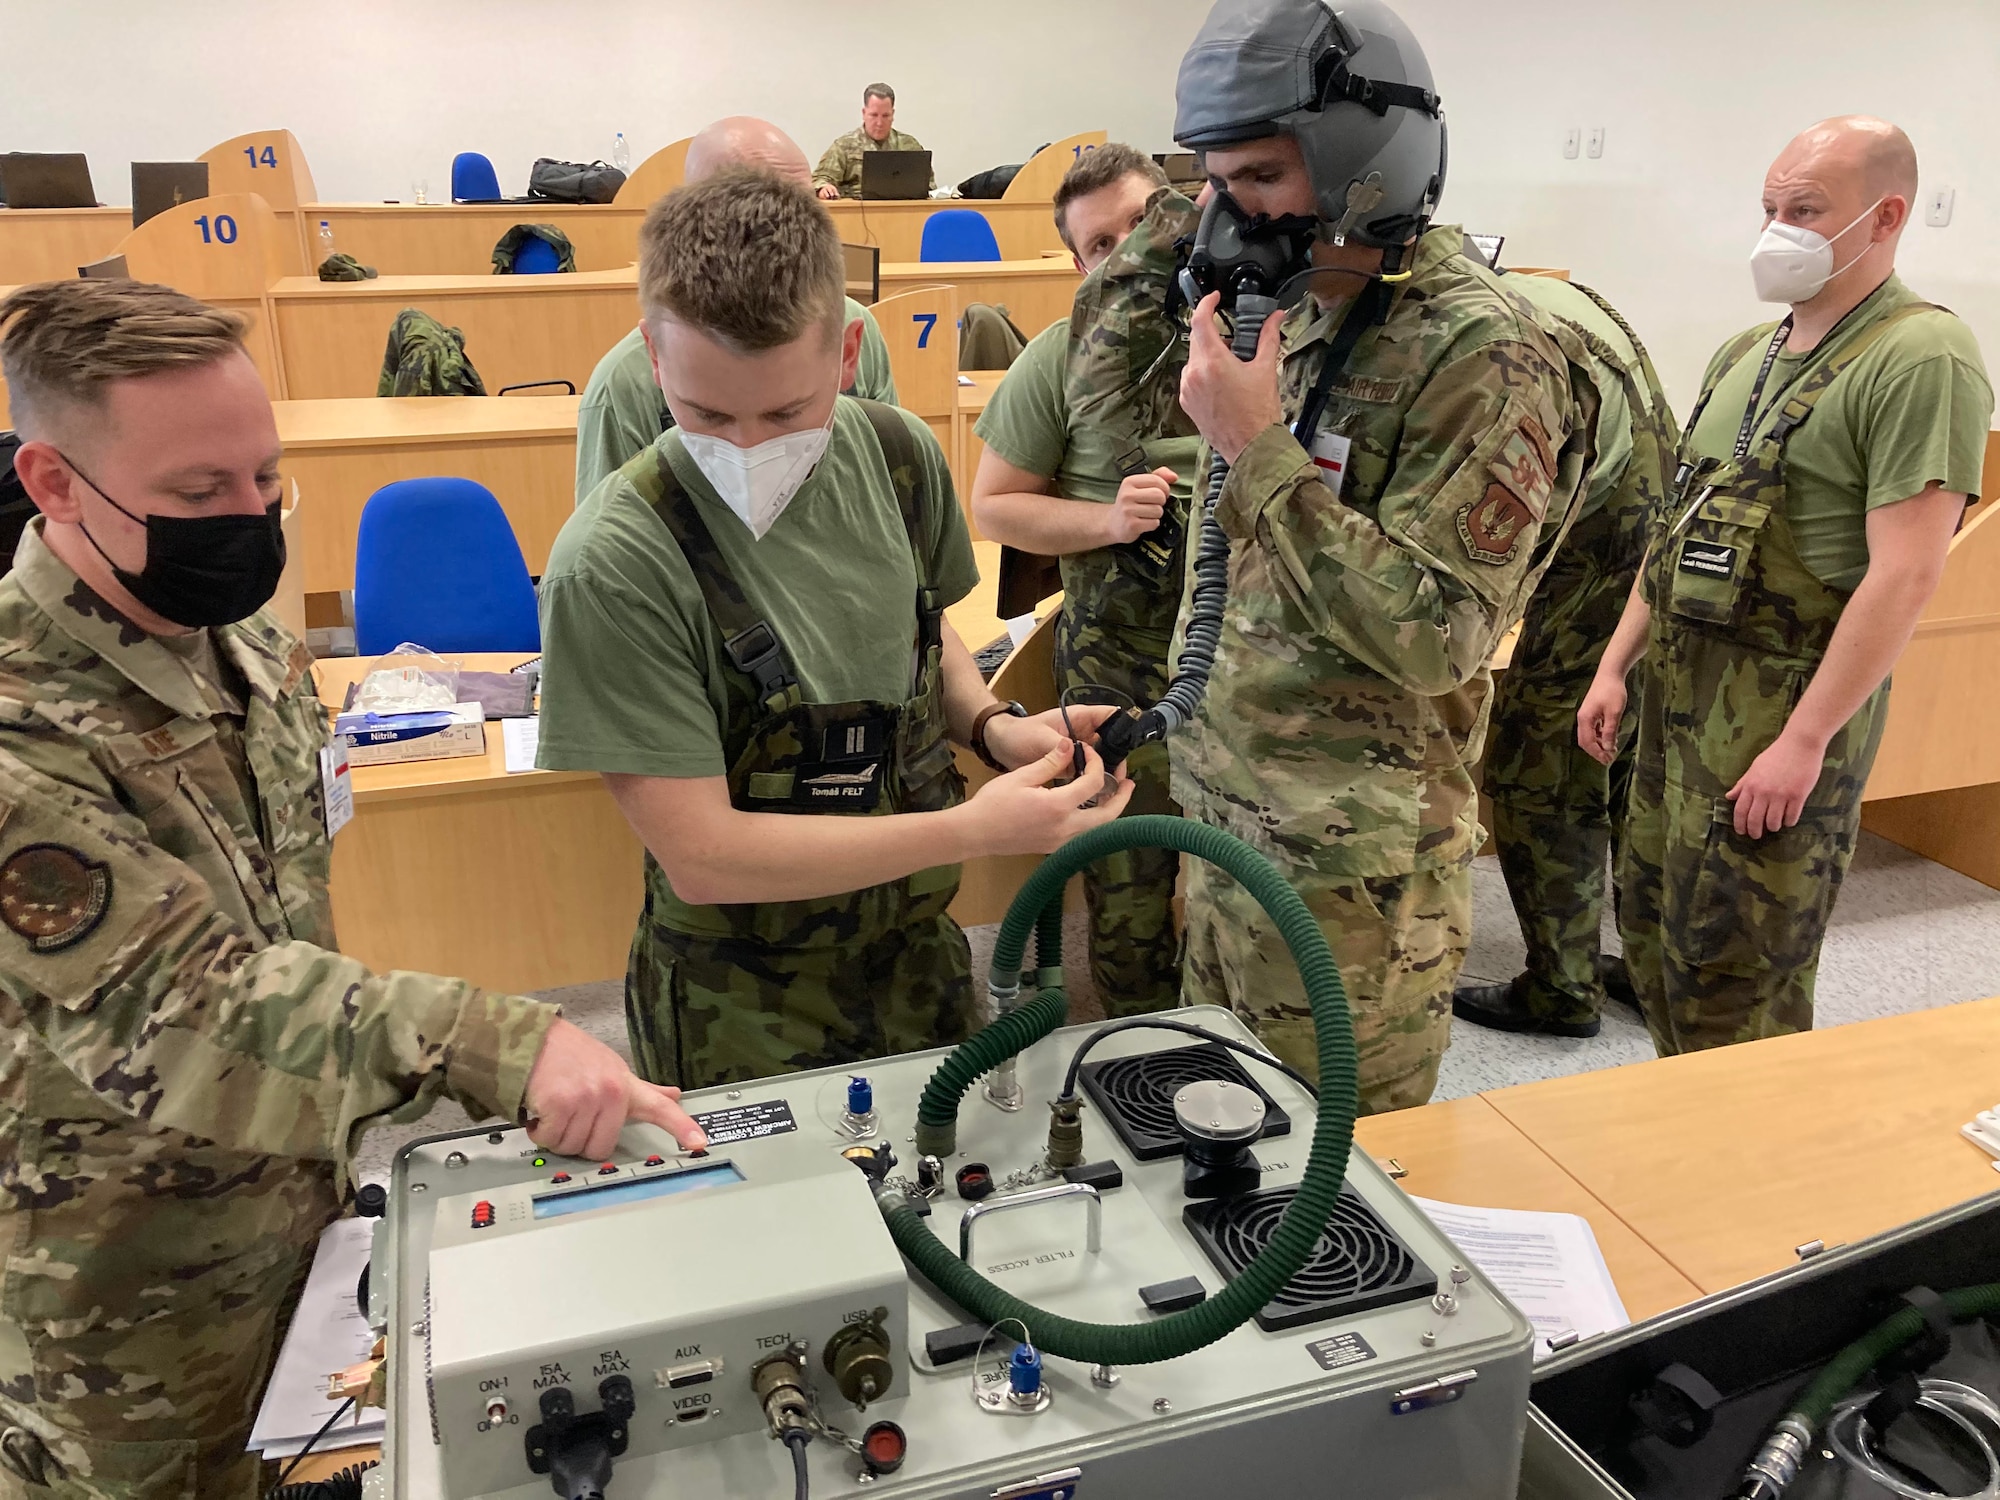 An Airman teaches the Czechian AF about joint aircrew system testers.